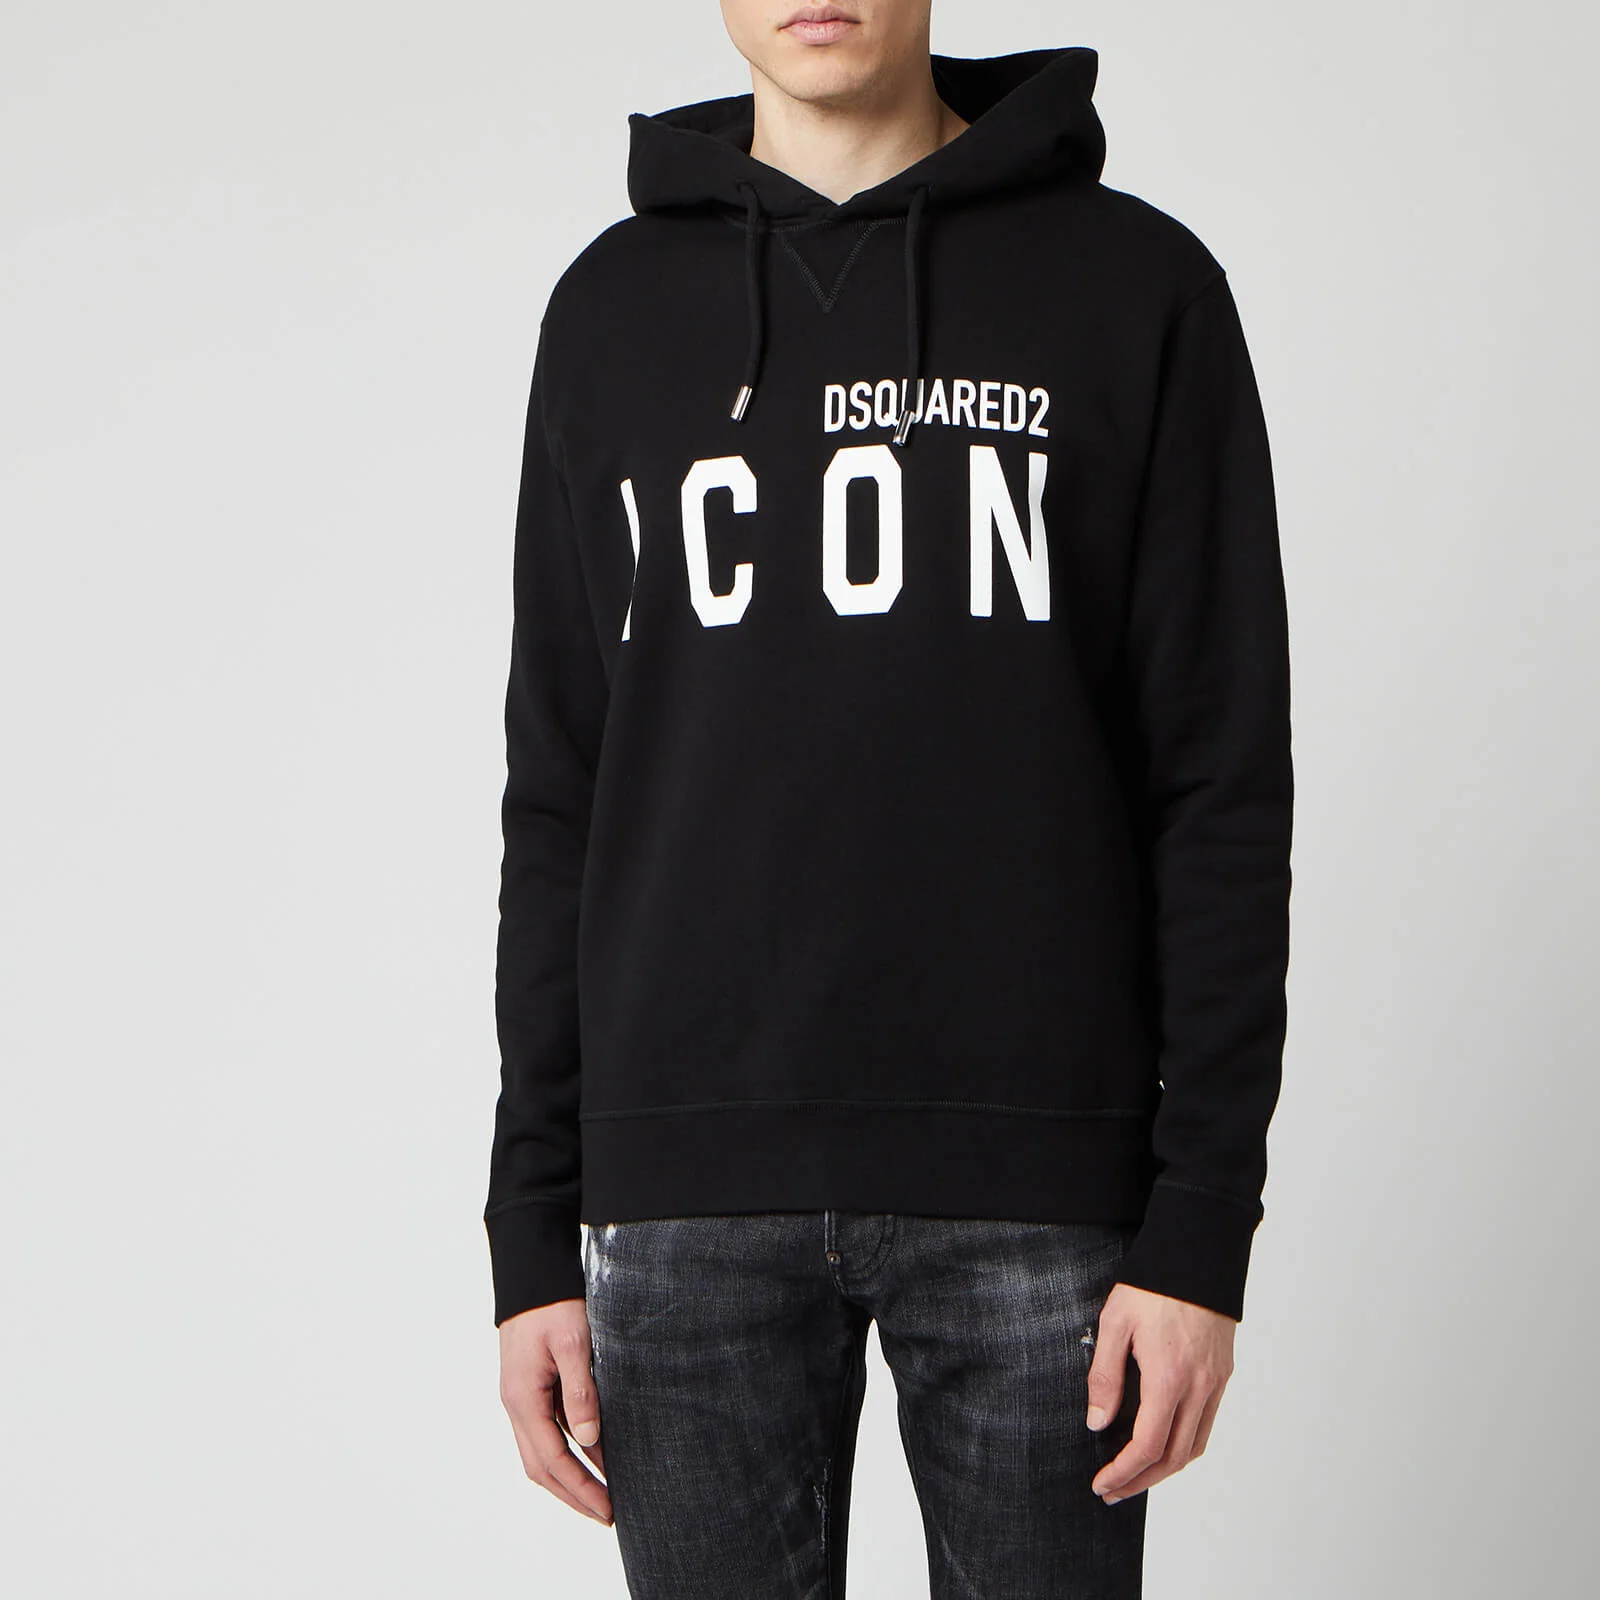 Dsquared2 Men's Cool Fit Icon Hoody - Black/White Image 1